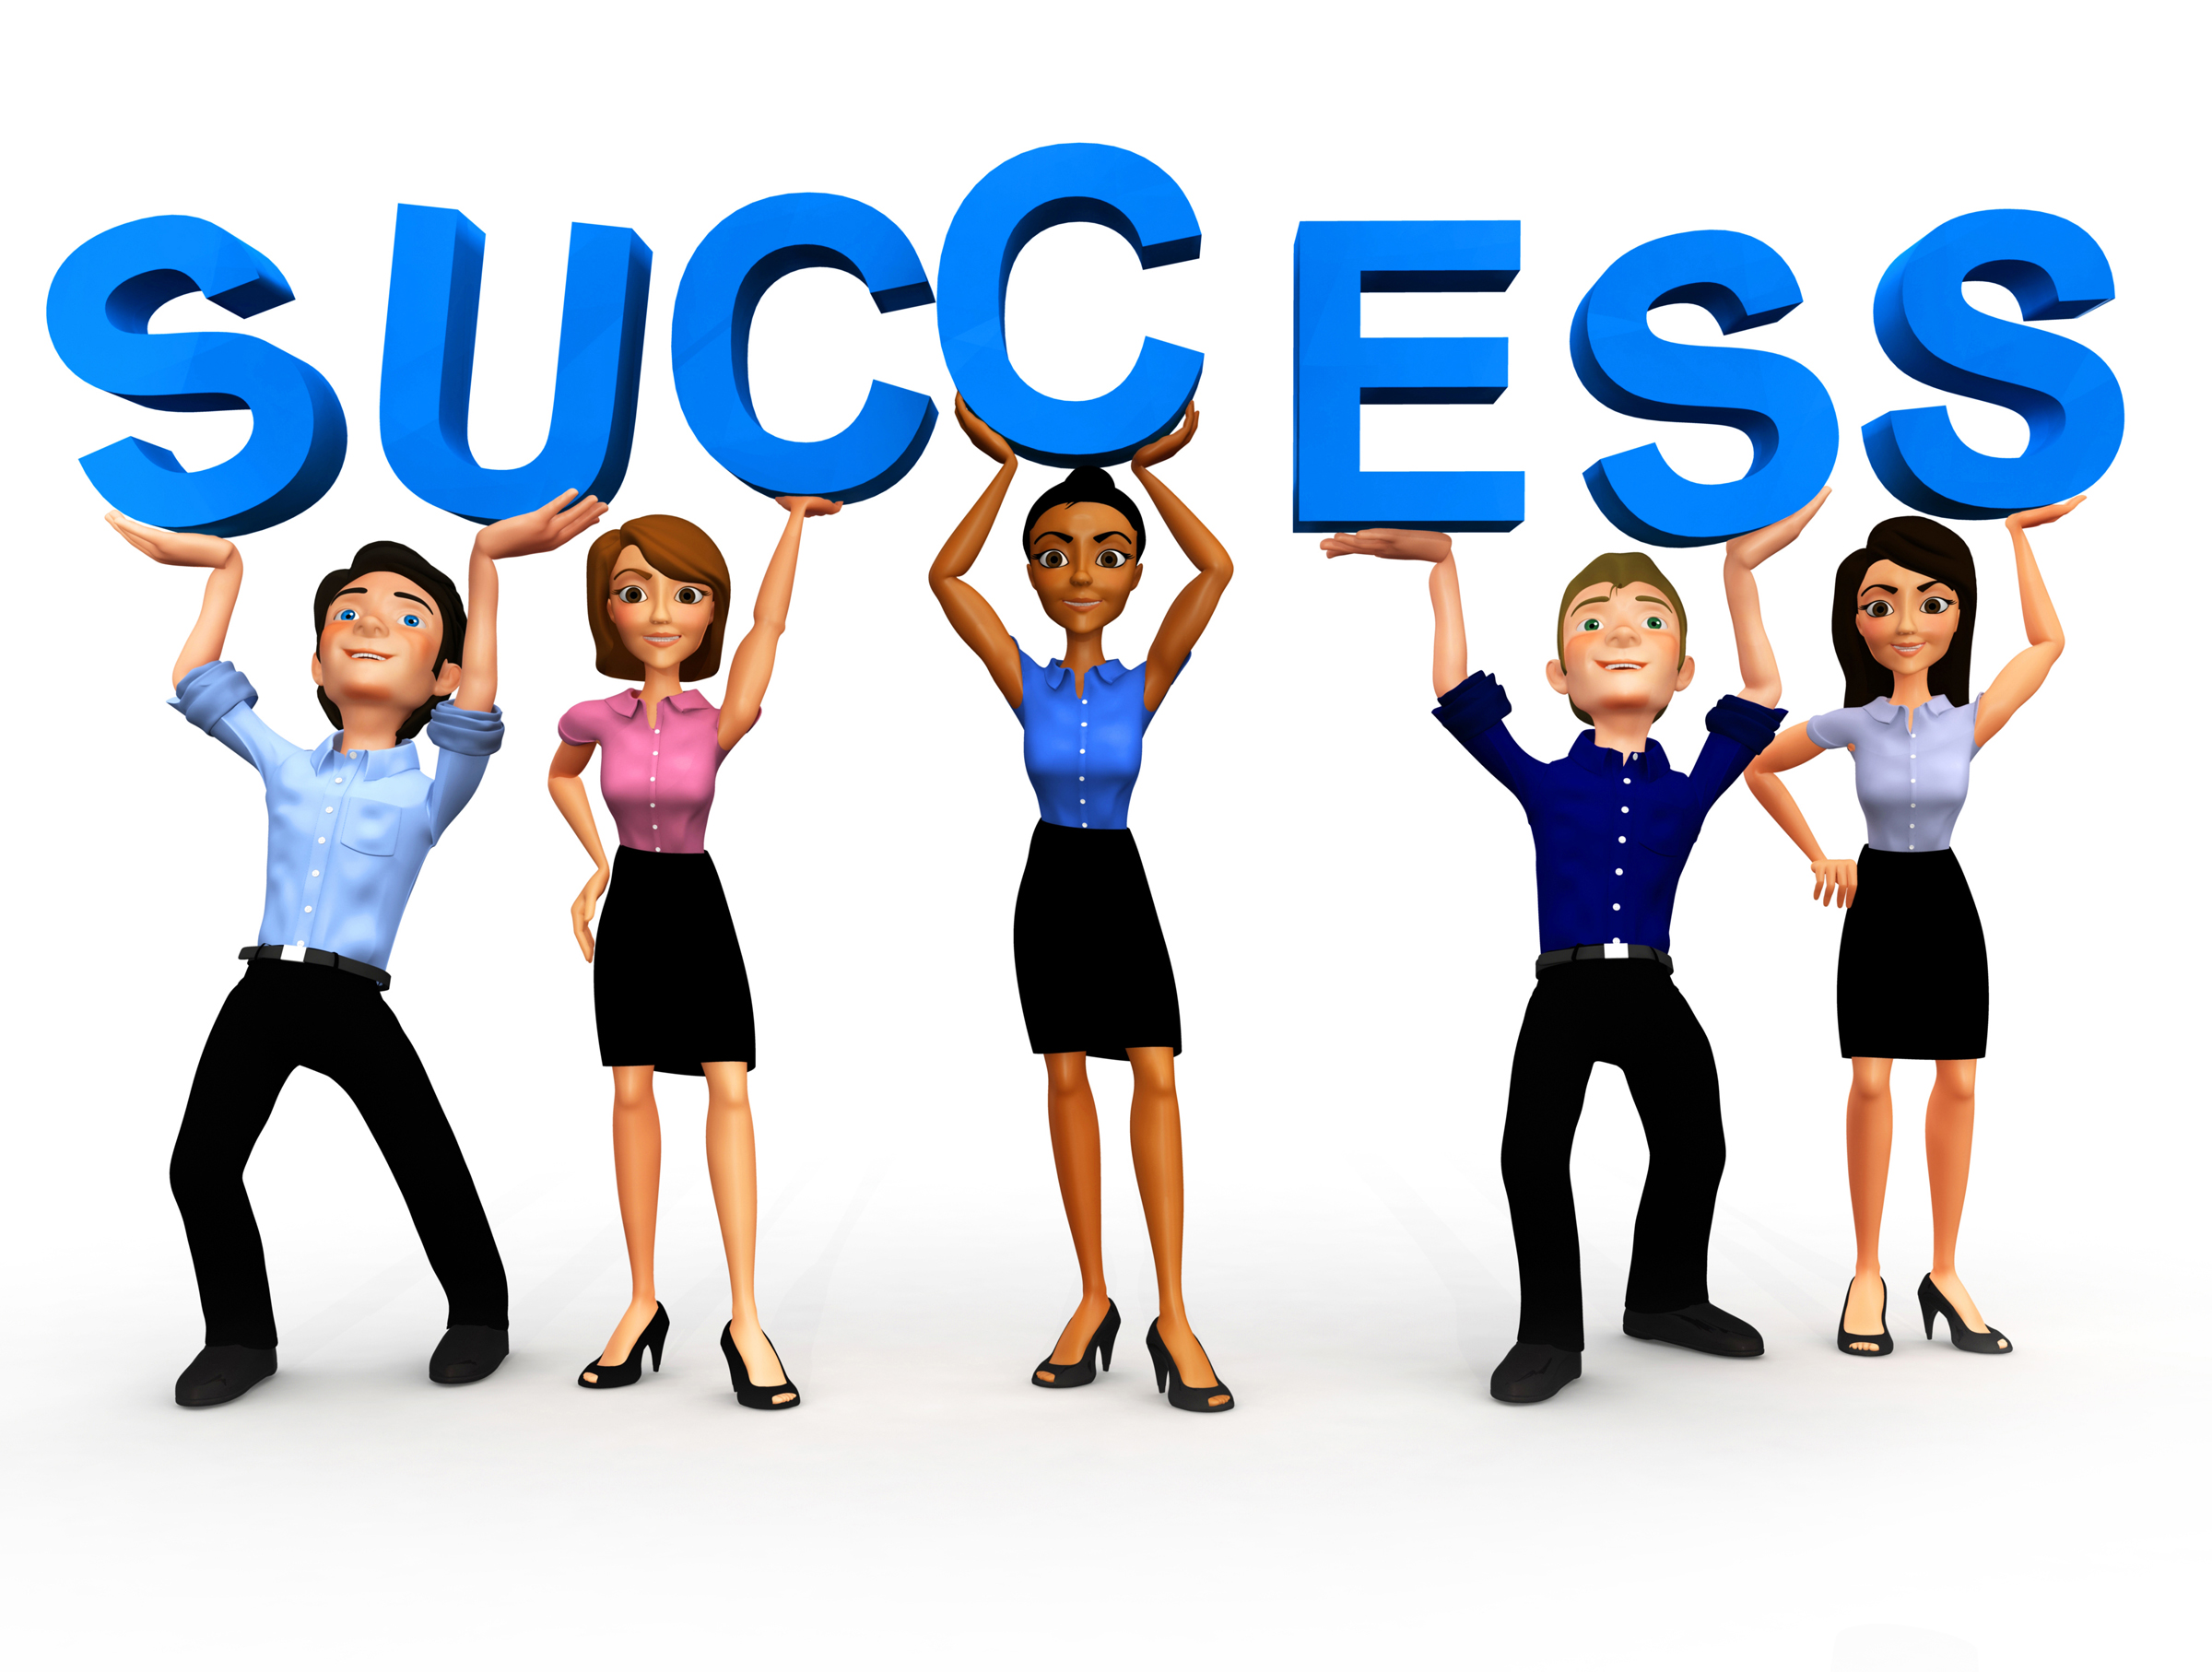 Business People Images Transparent Image Clipart